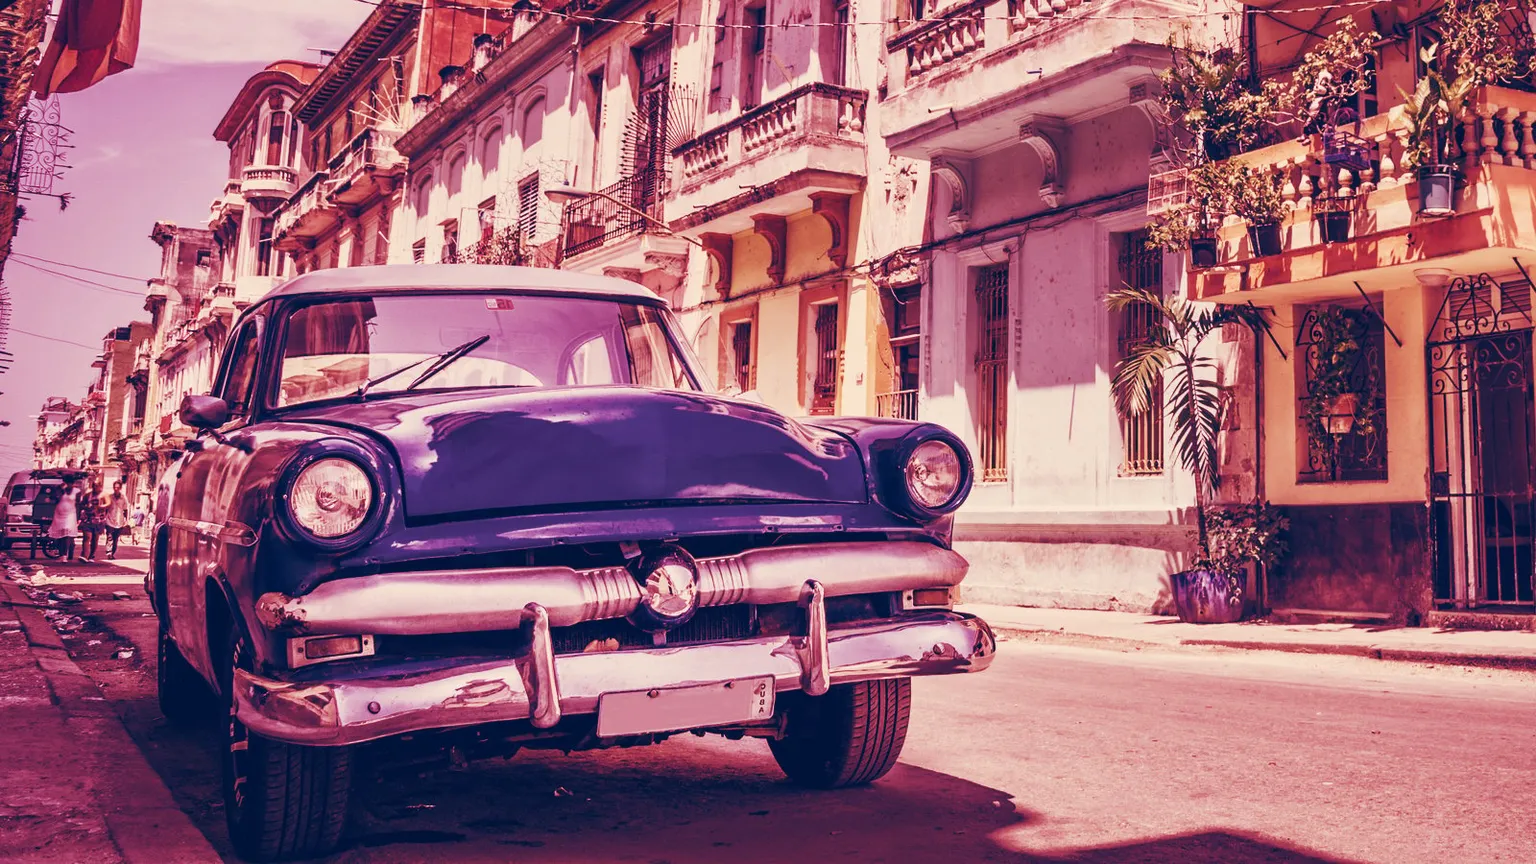 Cuba's economy comes with a lot of restrictions. Image: Shutterstock